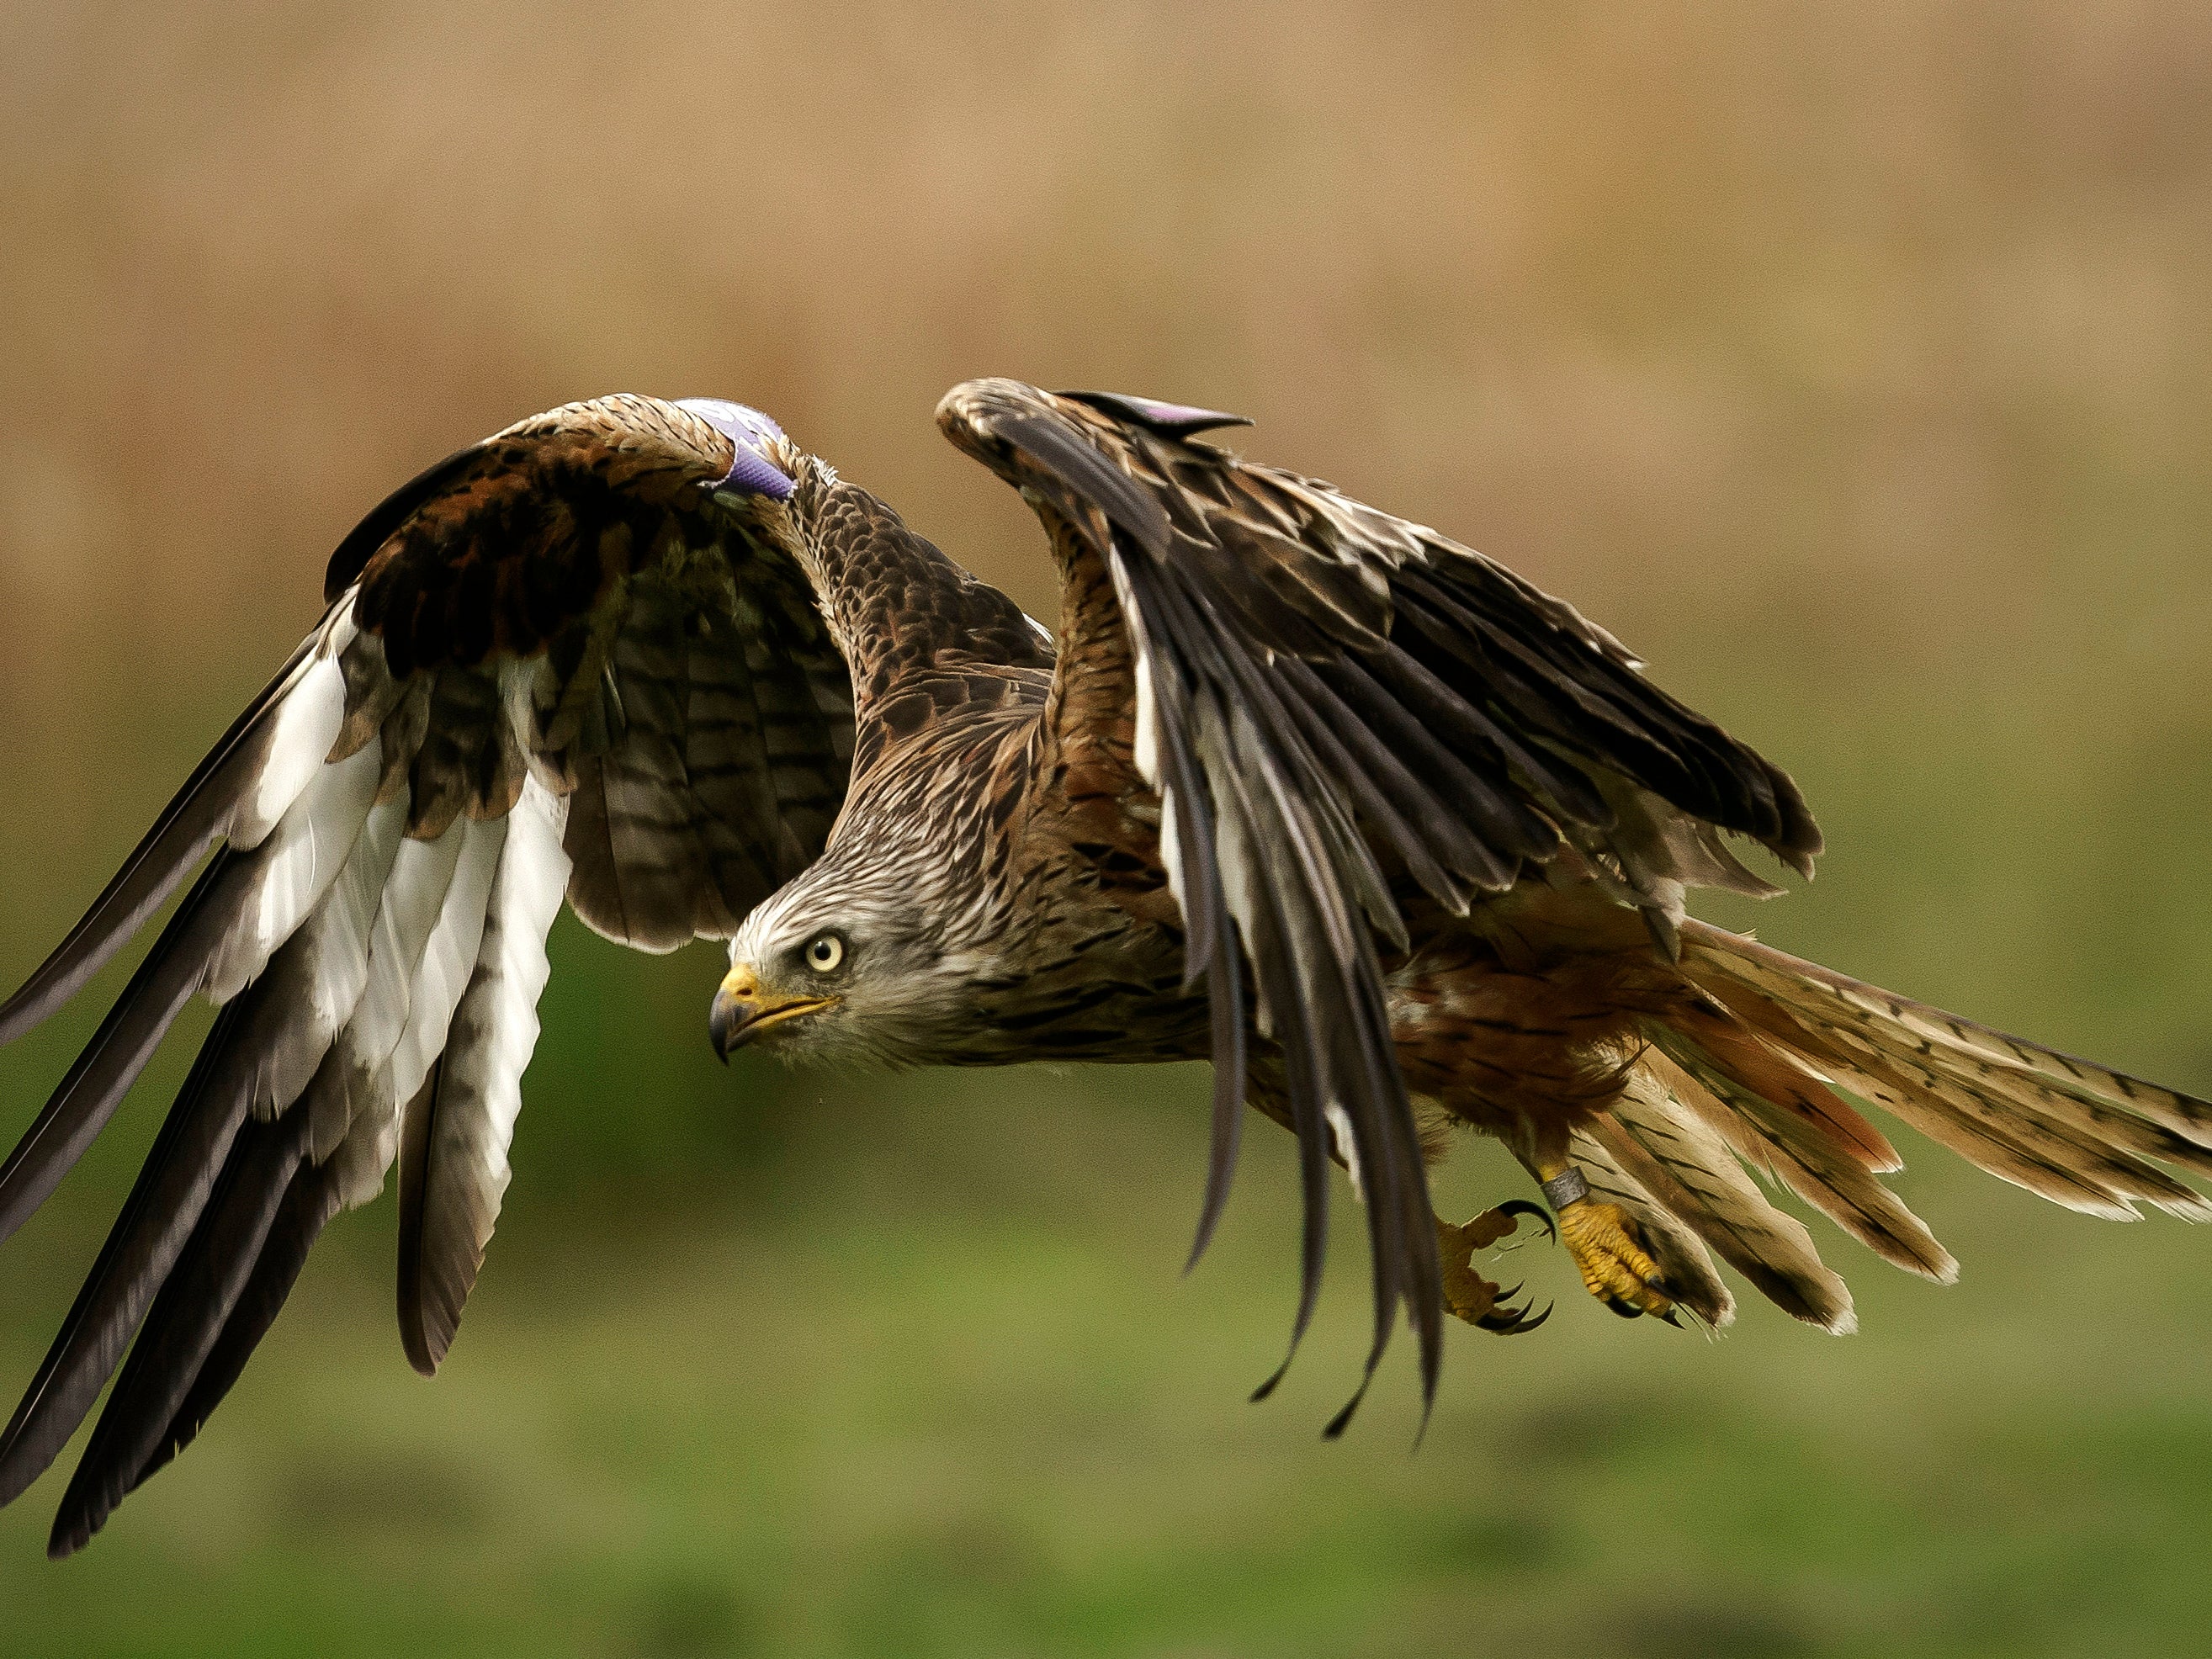 Red kite numbers are up 1,935 per cent in the last 25 years